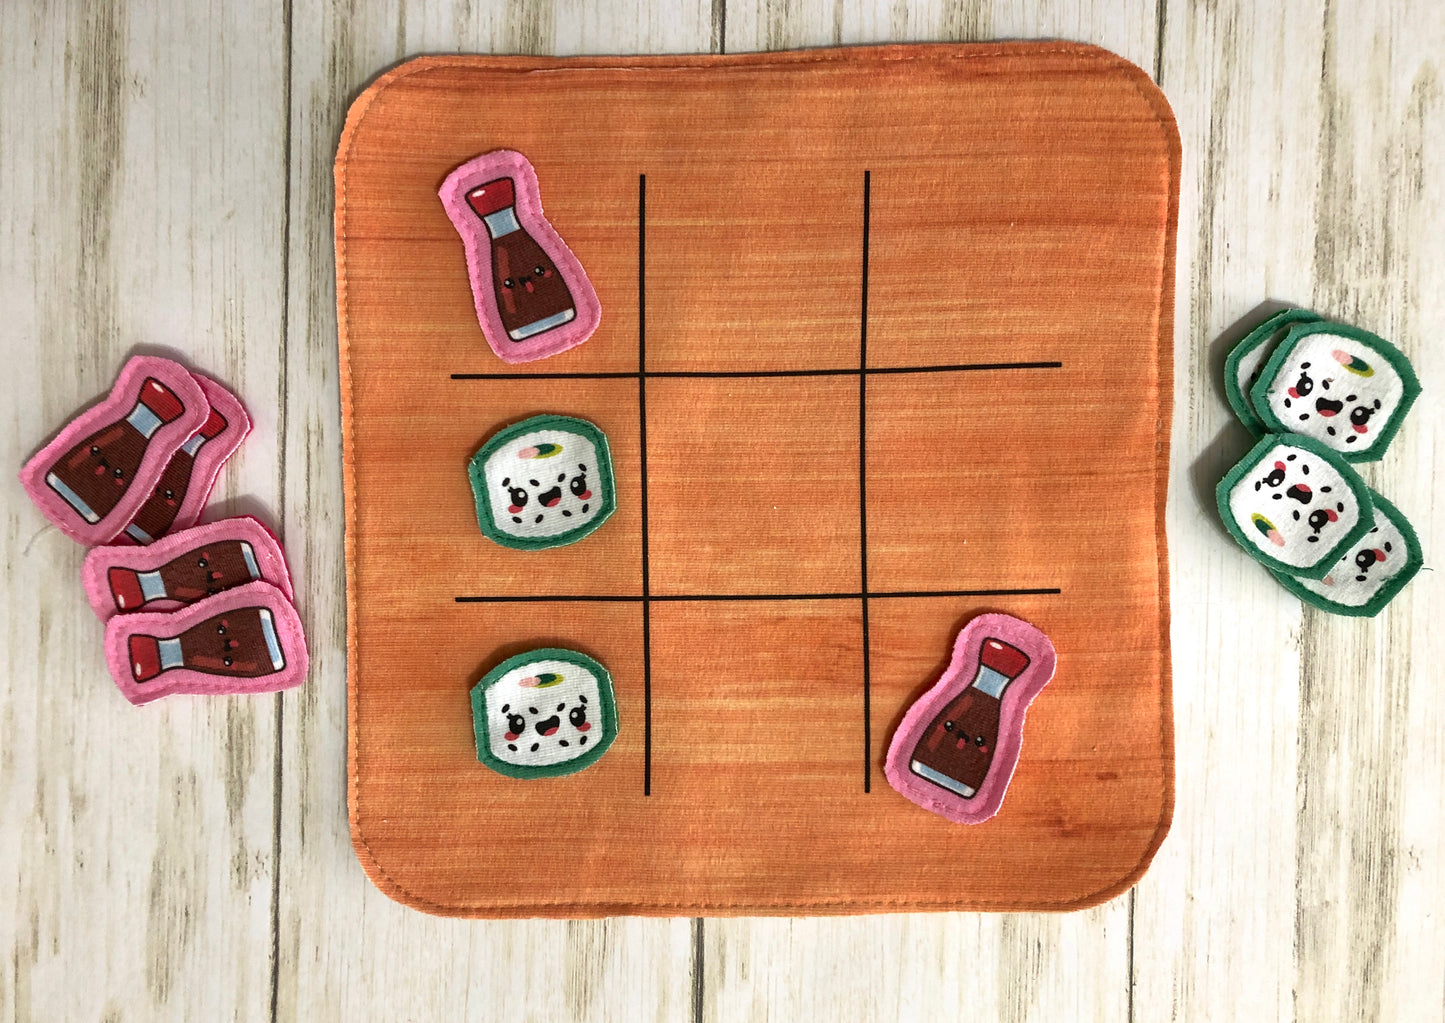 Sushi TicTacToe Playing Pieces Panel (TicTacToe board NOT included - sold separately)